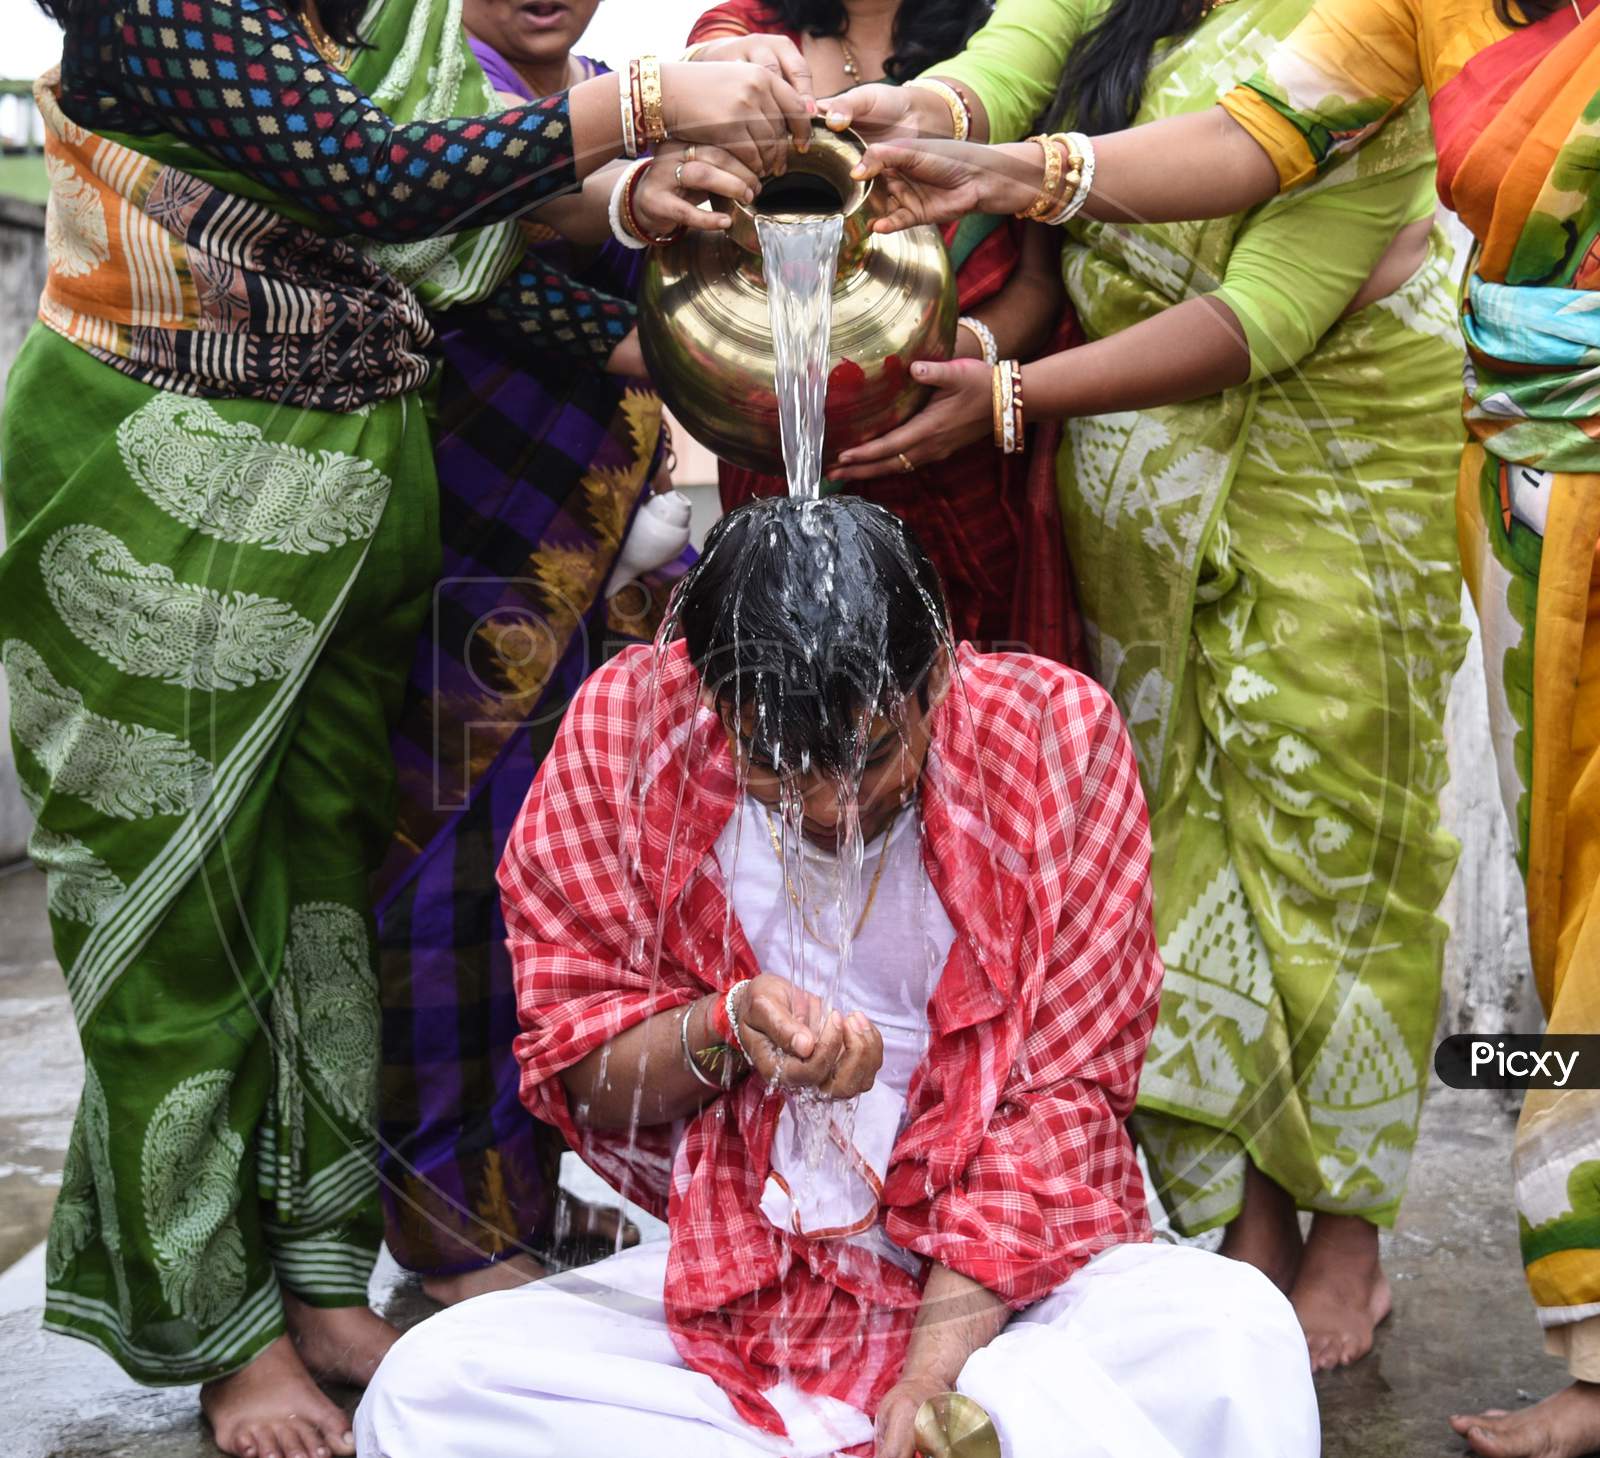 Groom Is Being Given Bath As Per Bengali Marriage Rituals.